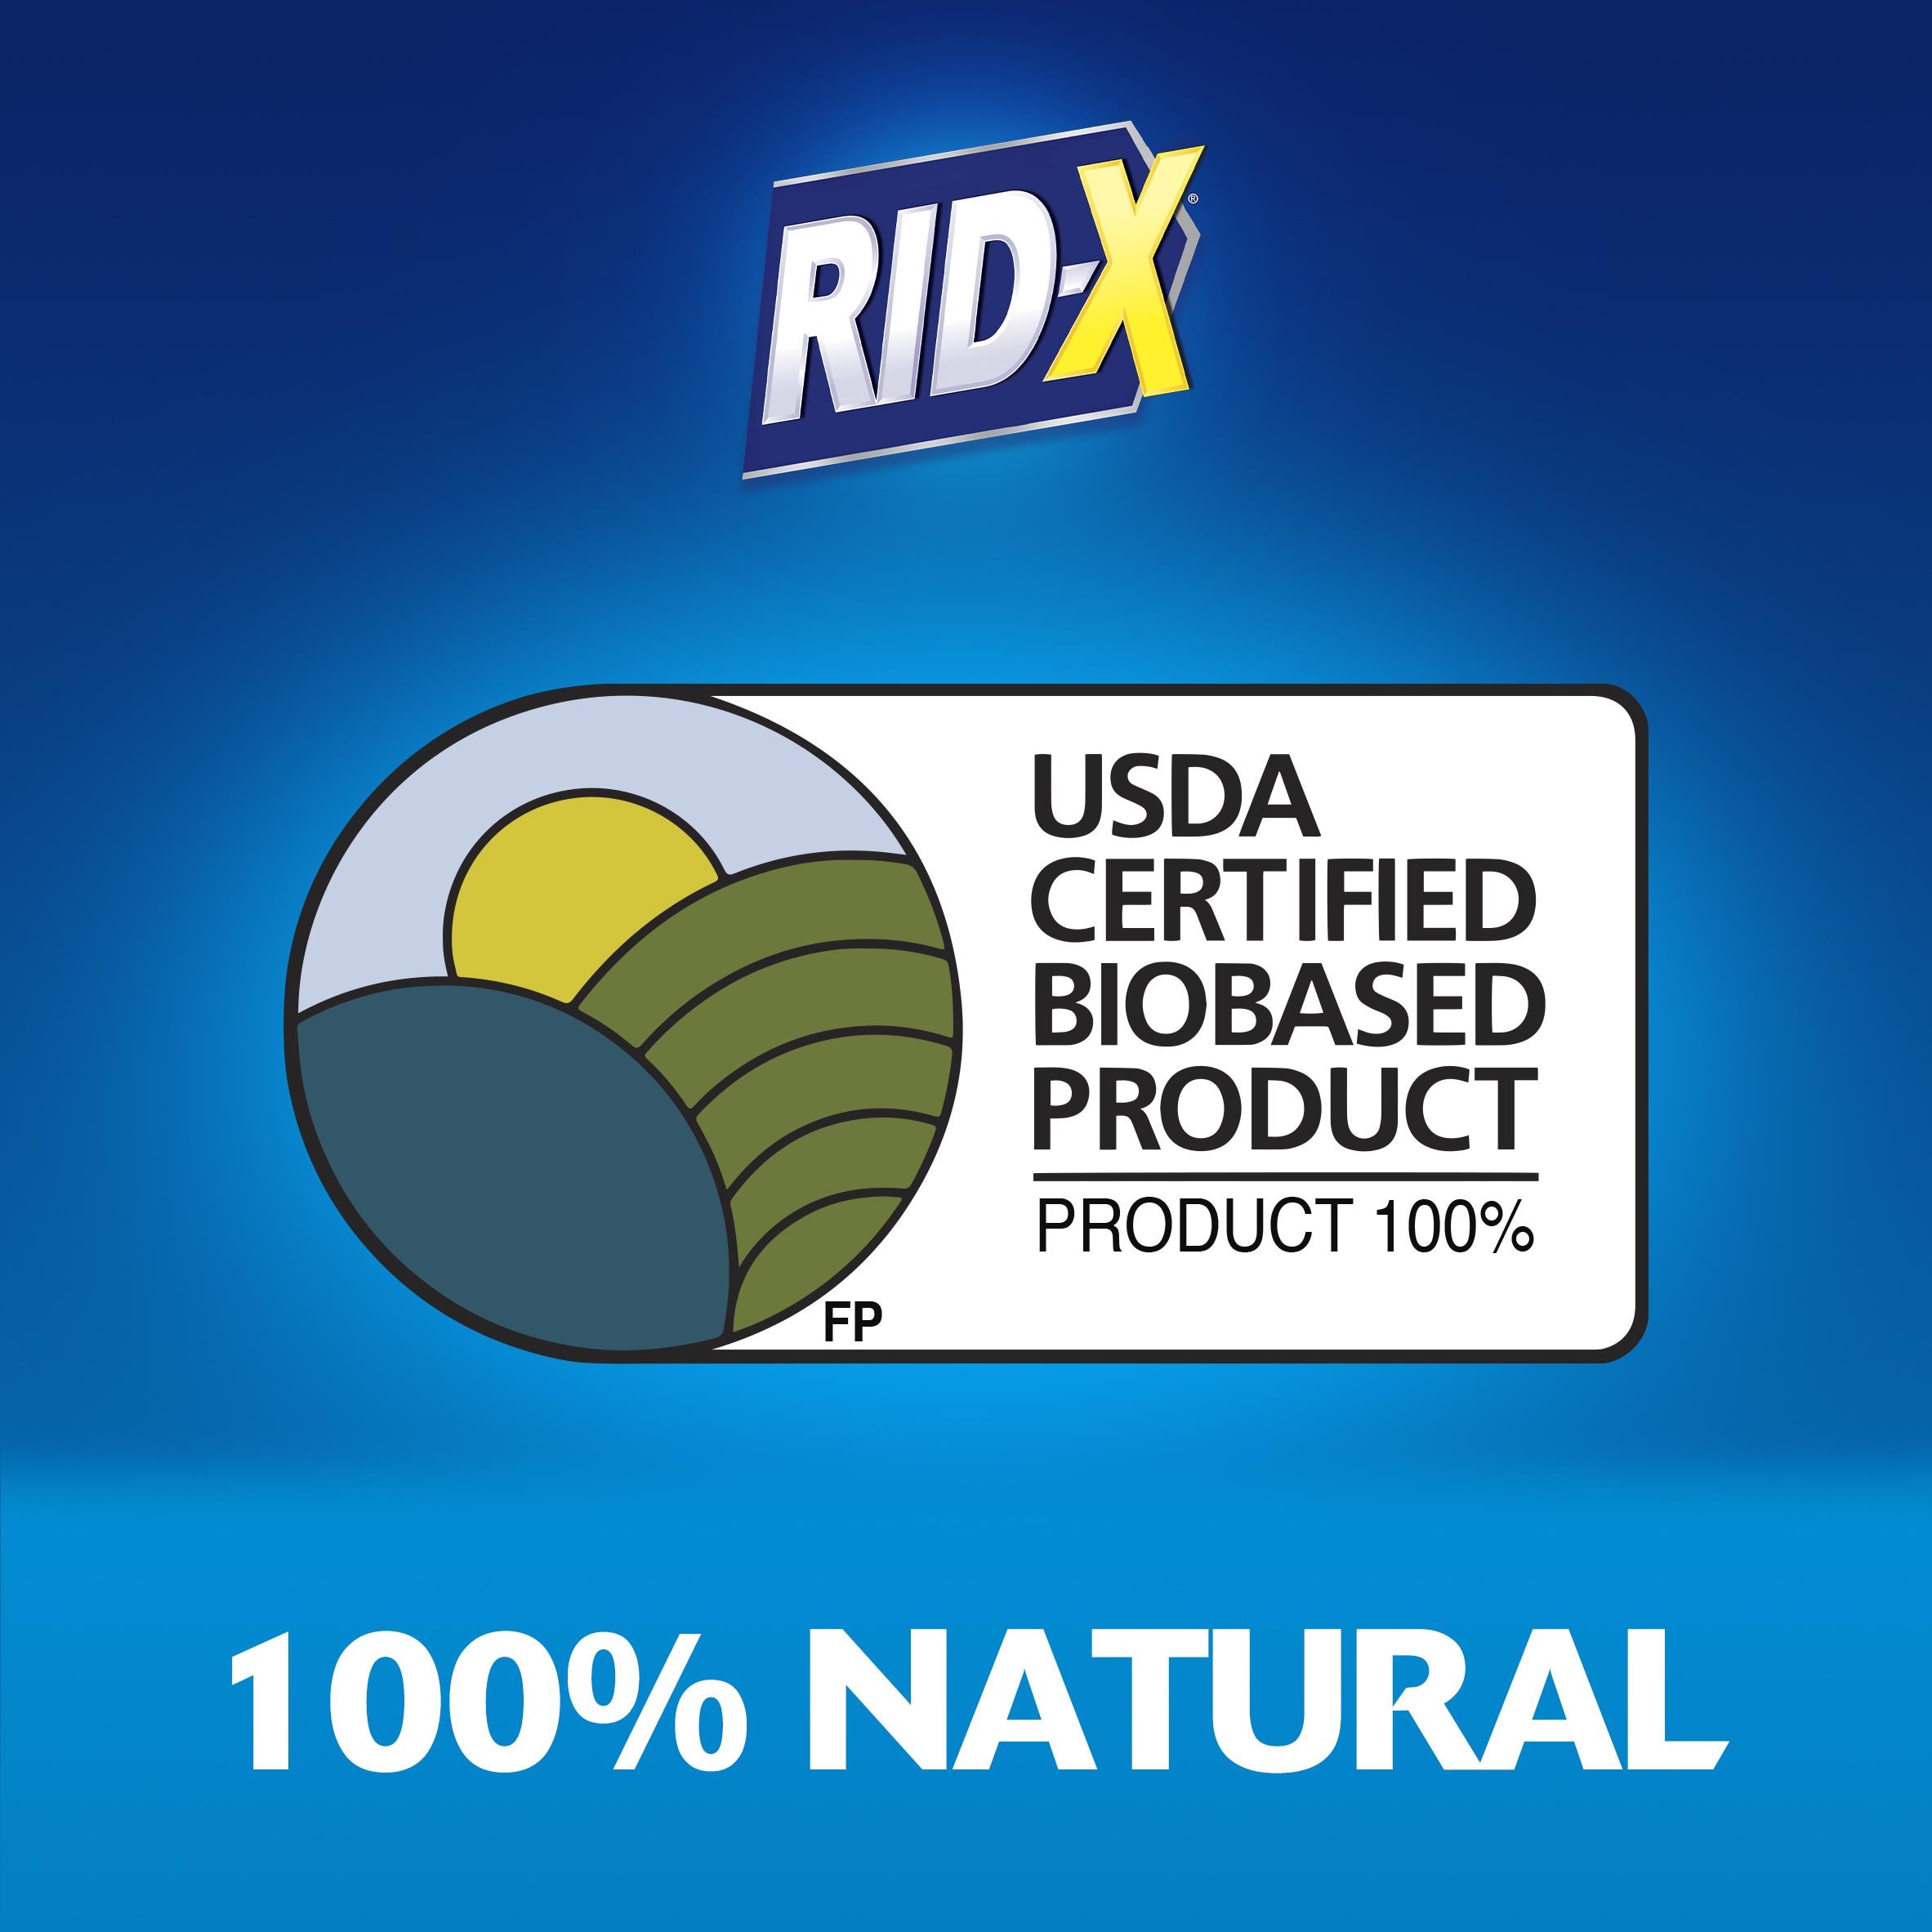 Rid-X Professional Septic System Maintenance Powder 10-oz Septic Cleaner in  the Septic Cleaners department at